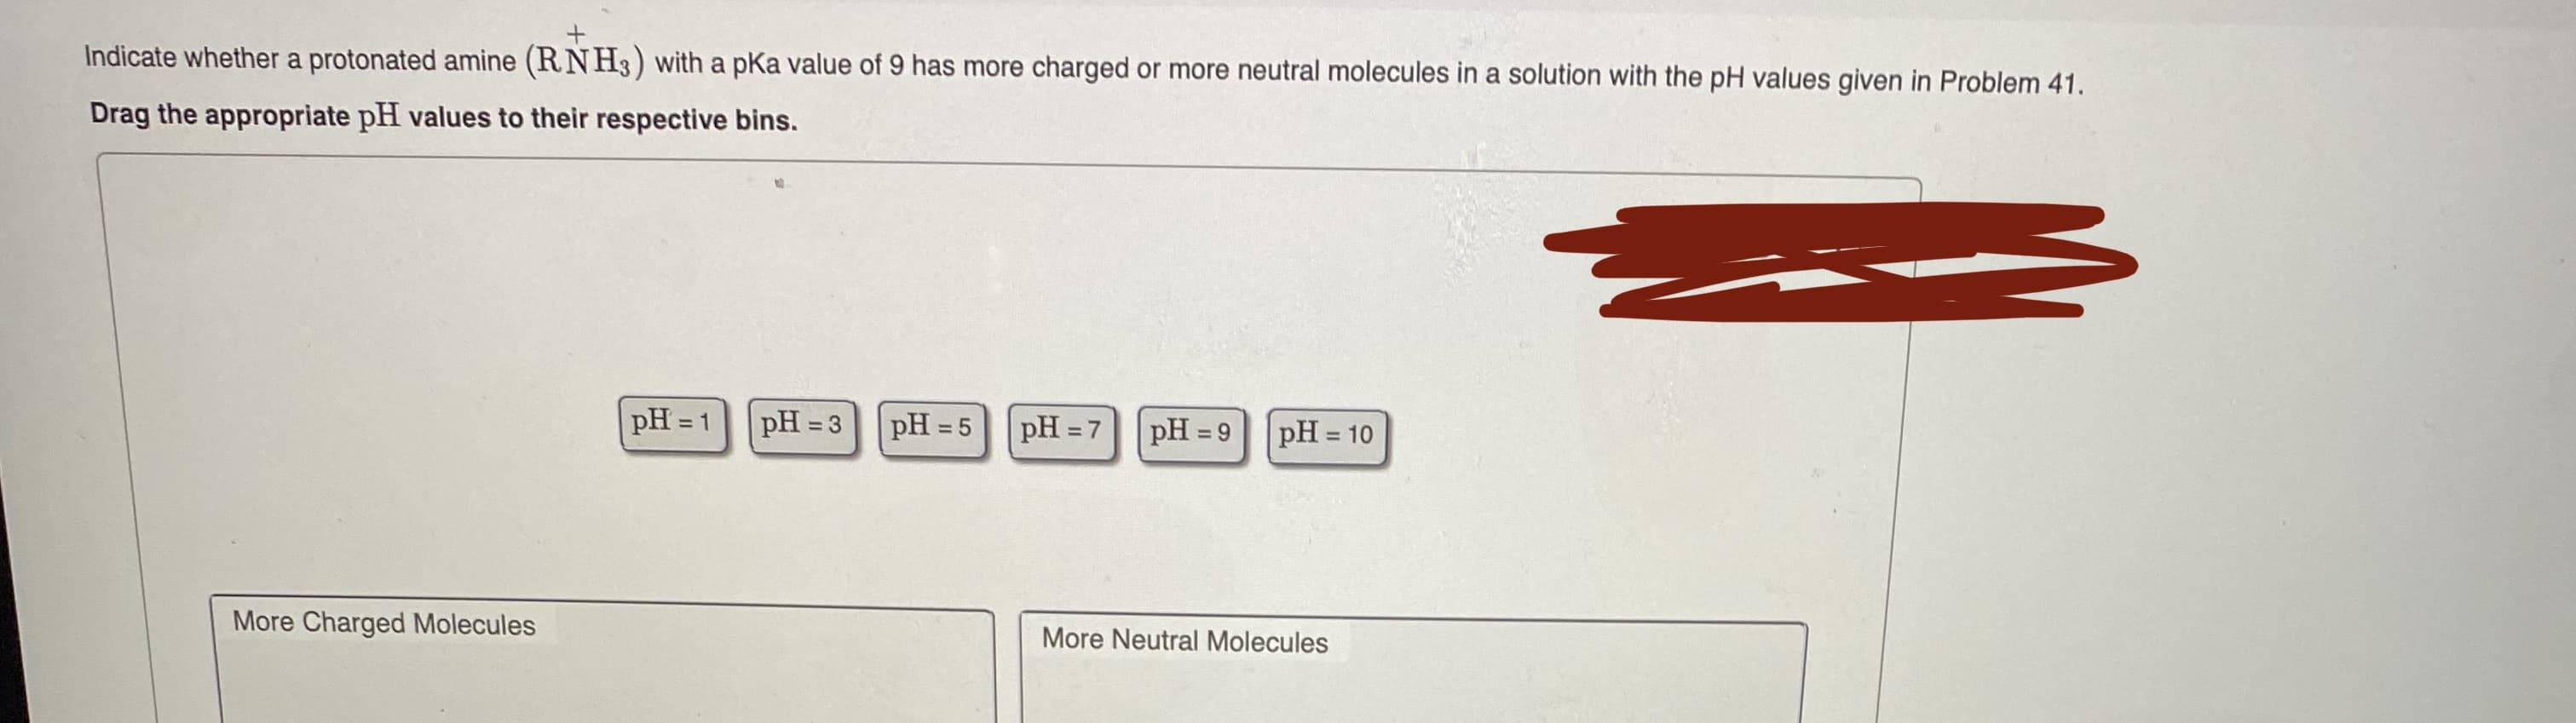 a pka value of 9 has more charged or more neutral molecules in a solution with the pH value:
